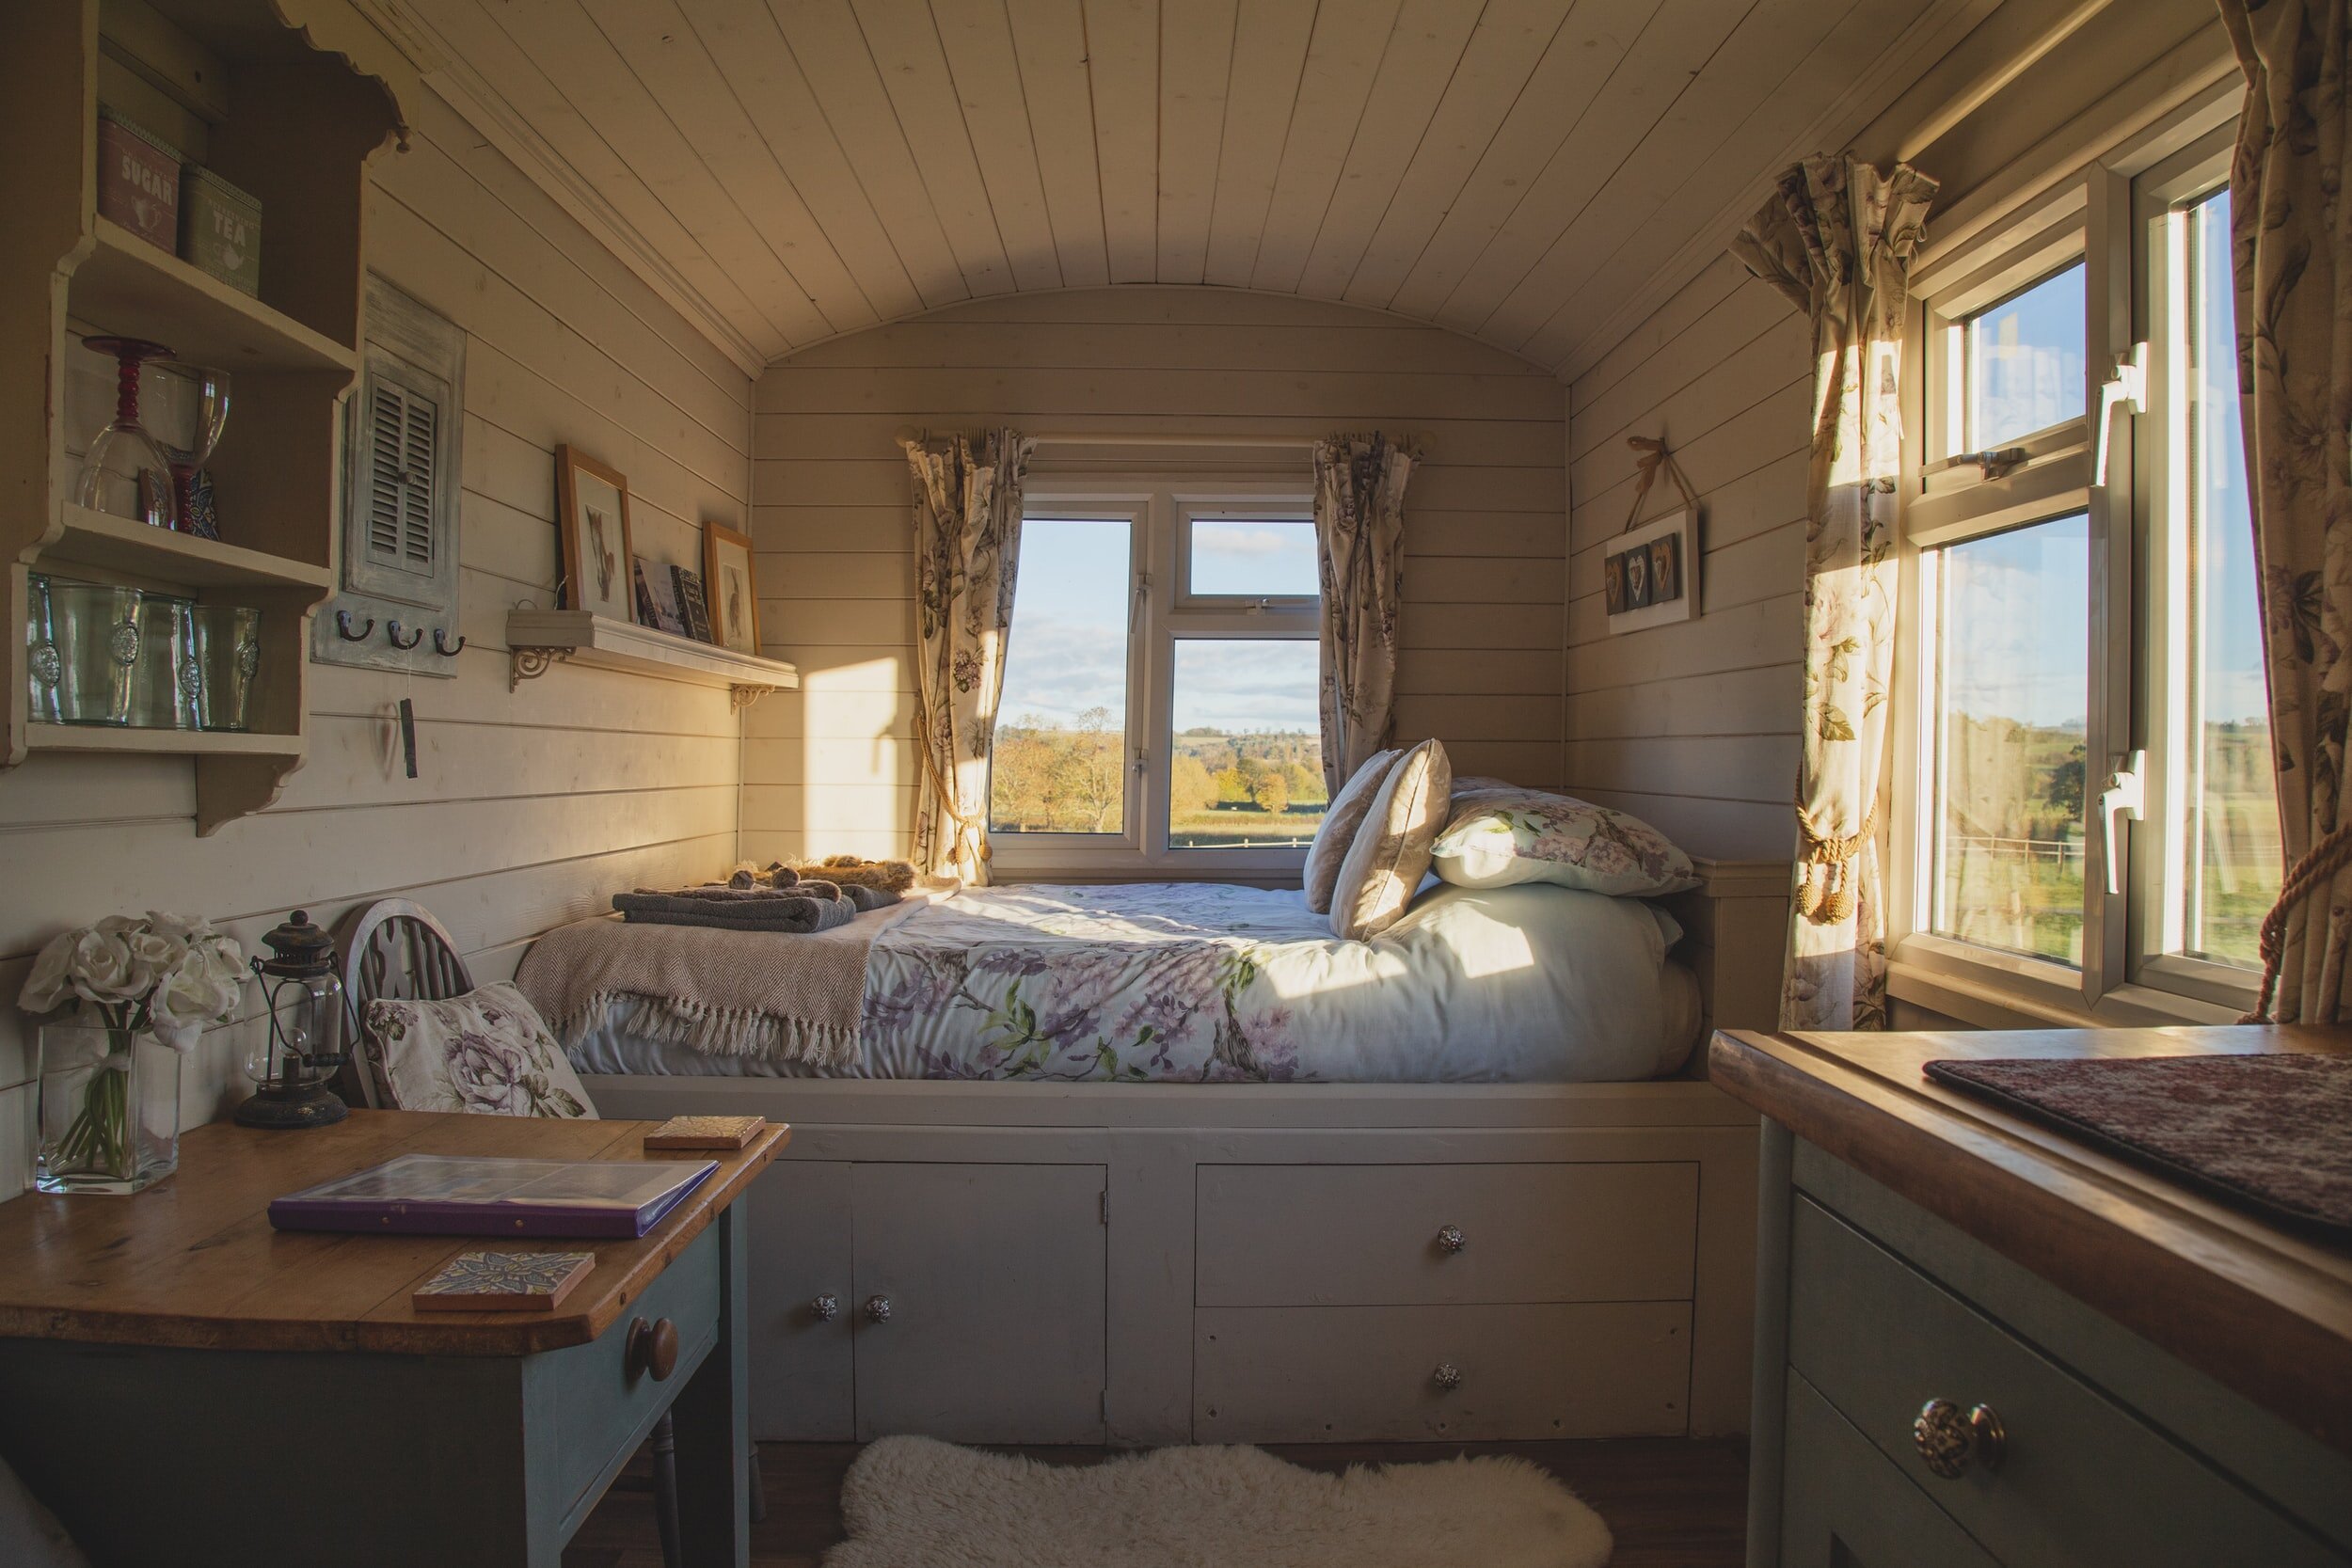 The Reasons I Live in a Tiny House and Why You Might Want to Join